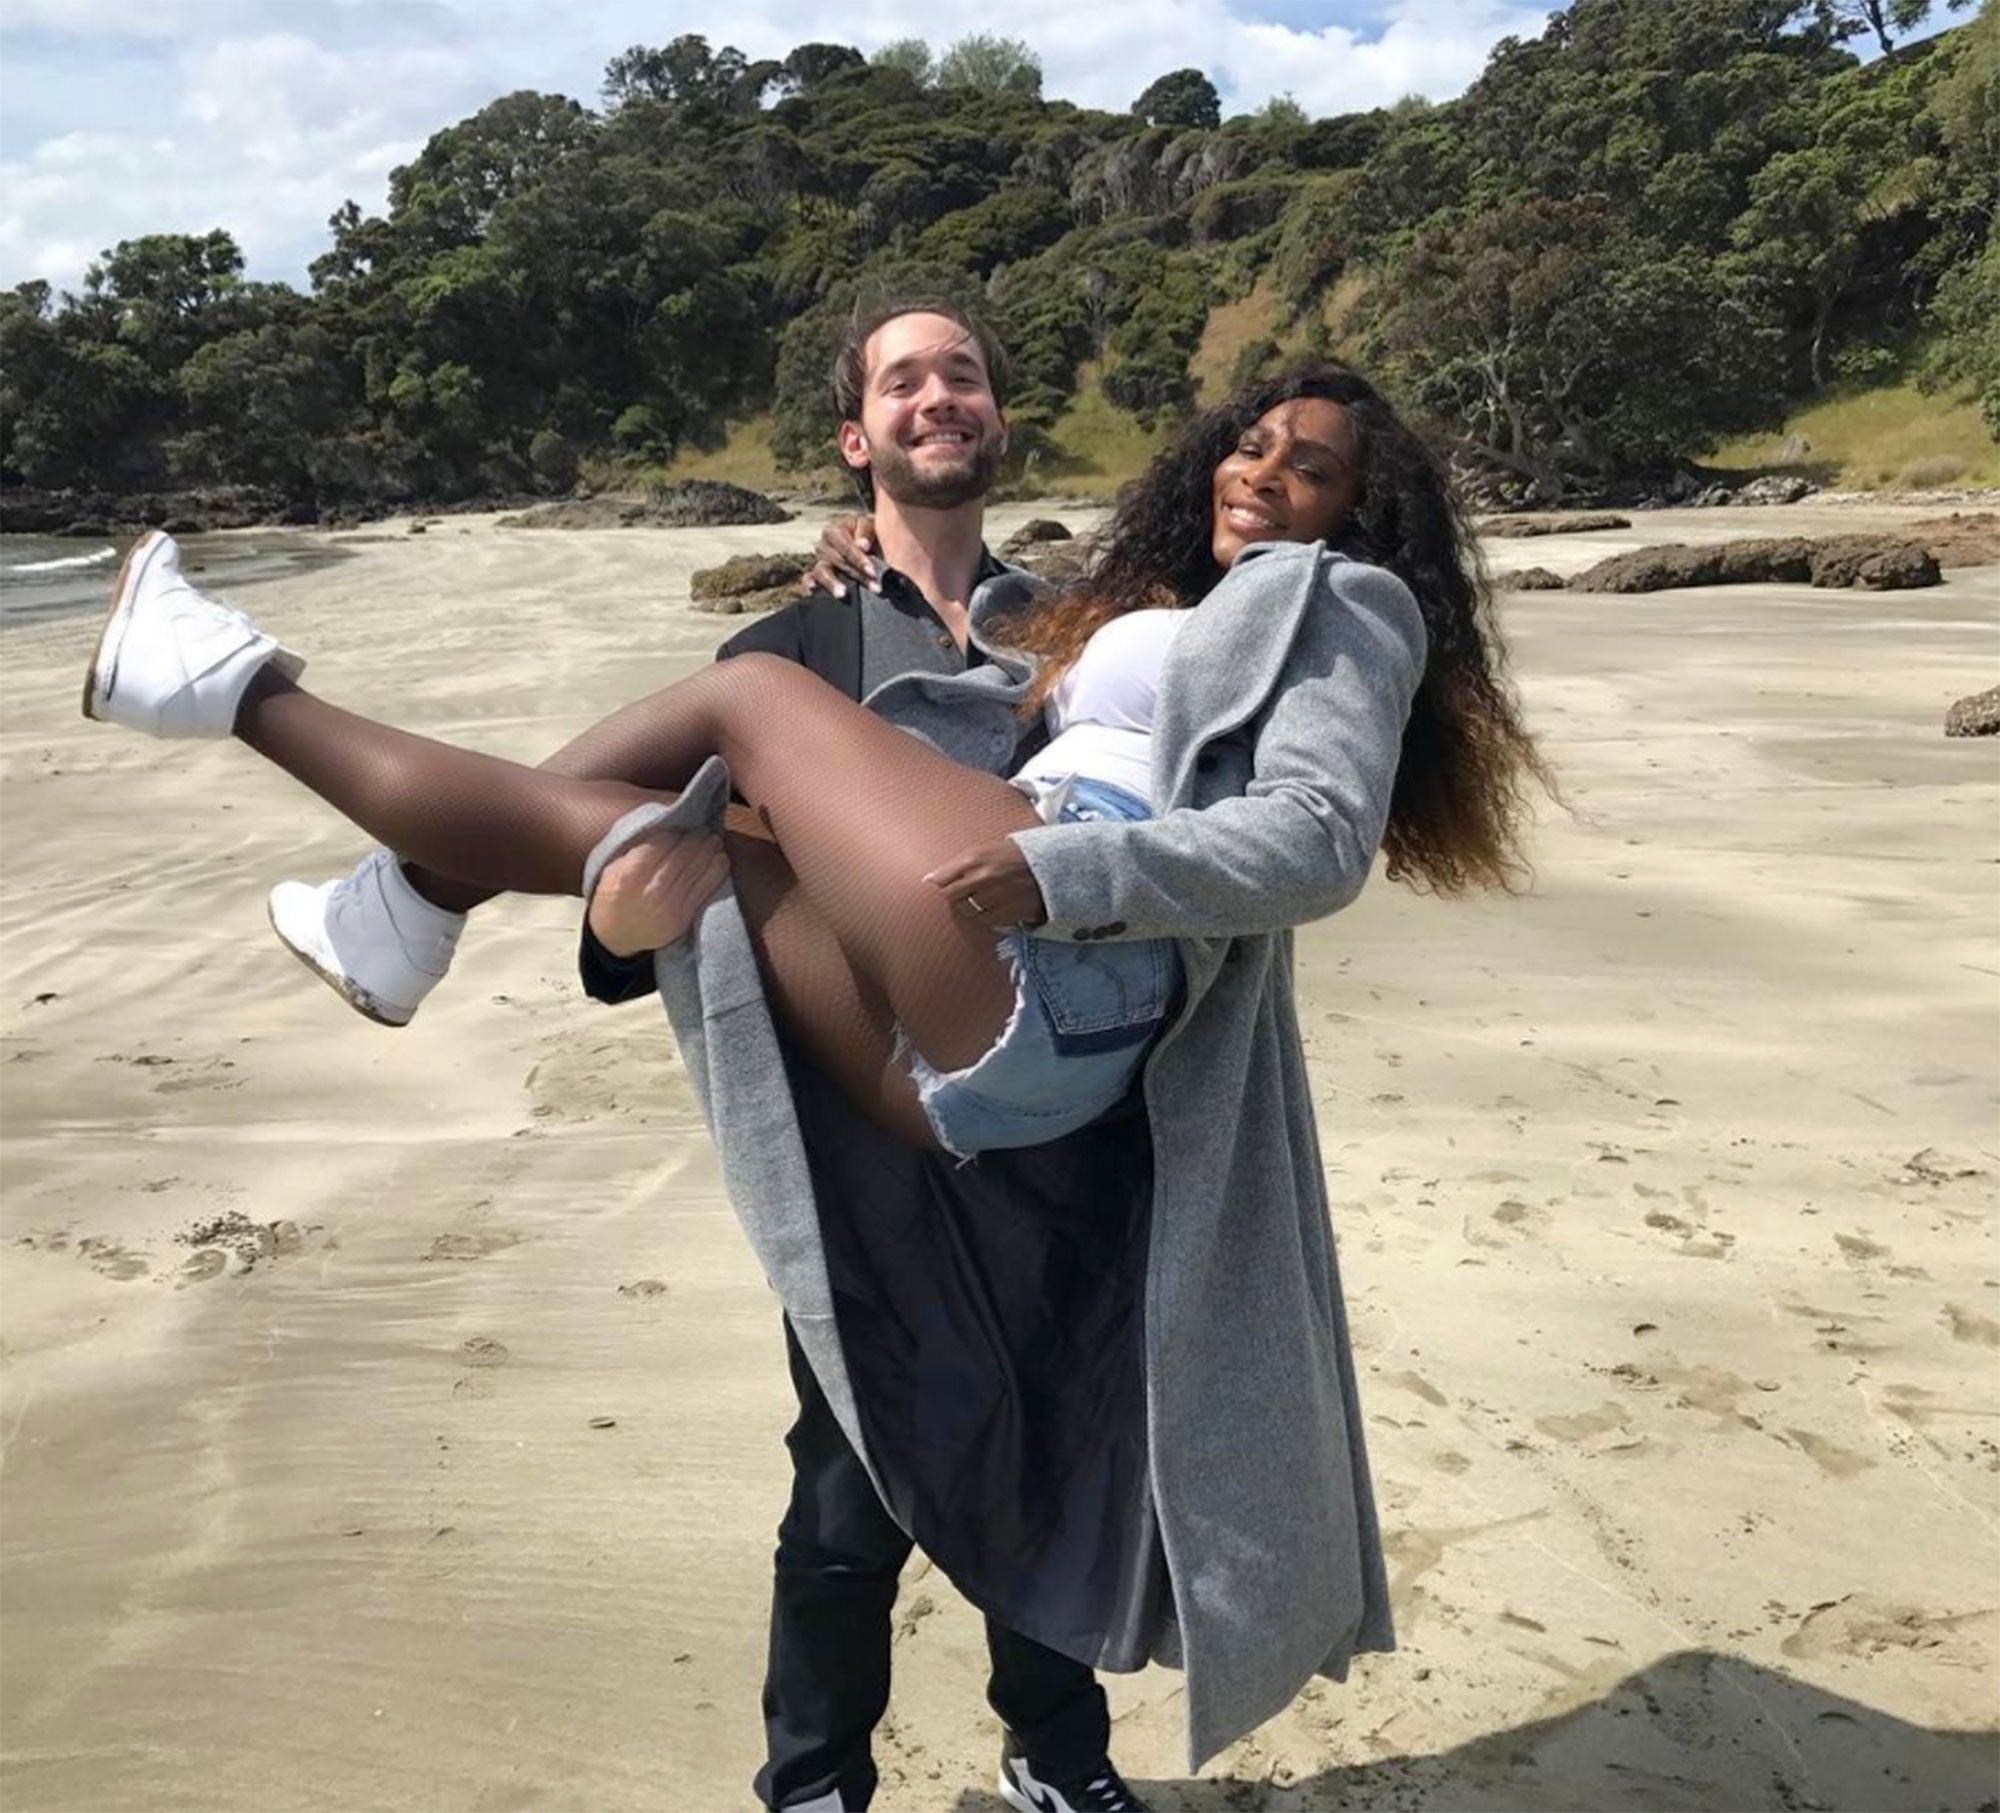 Serena Williams Gets Carried Away With Fiancé Alex Ohanian In Sweet Beach Snap
